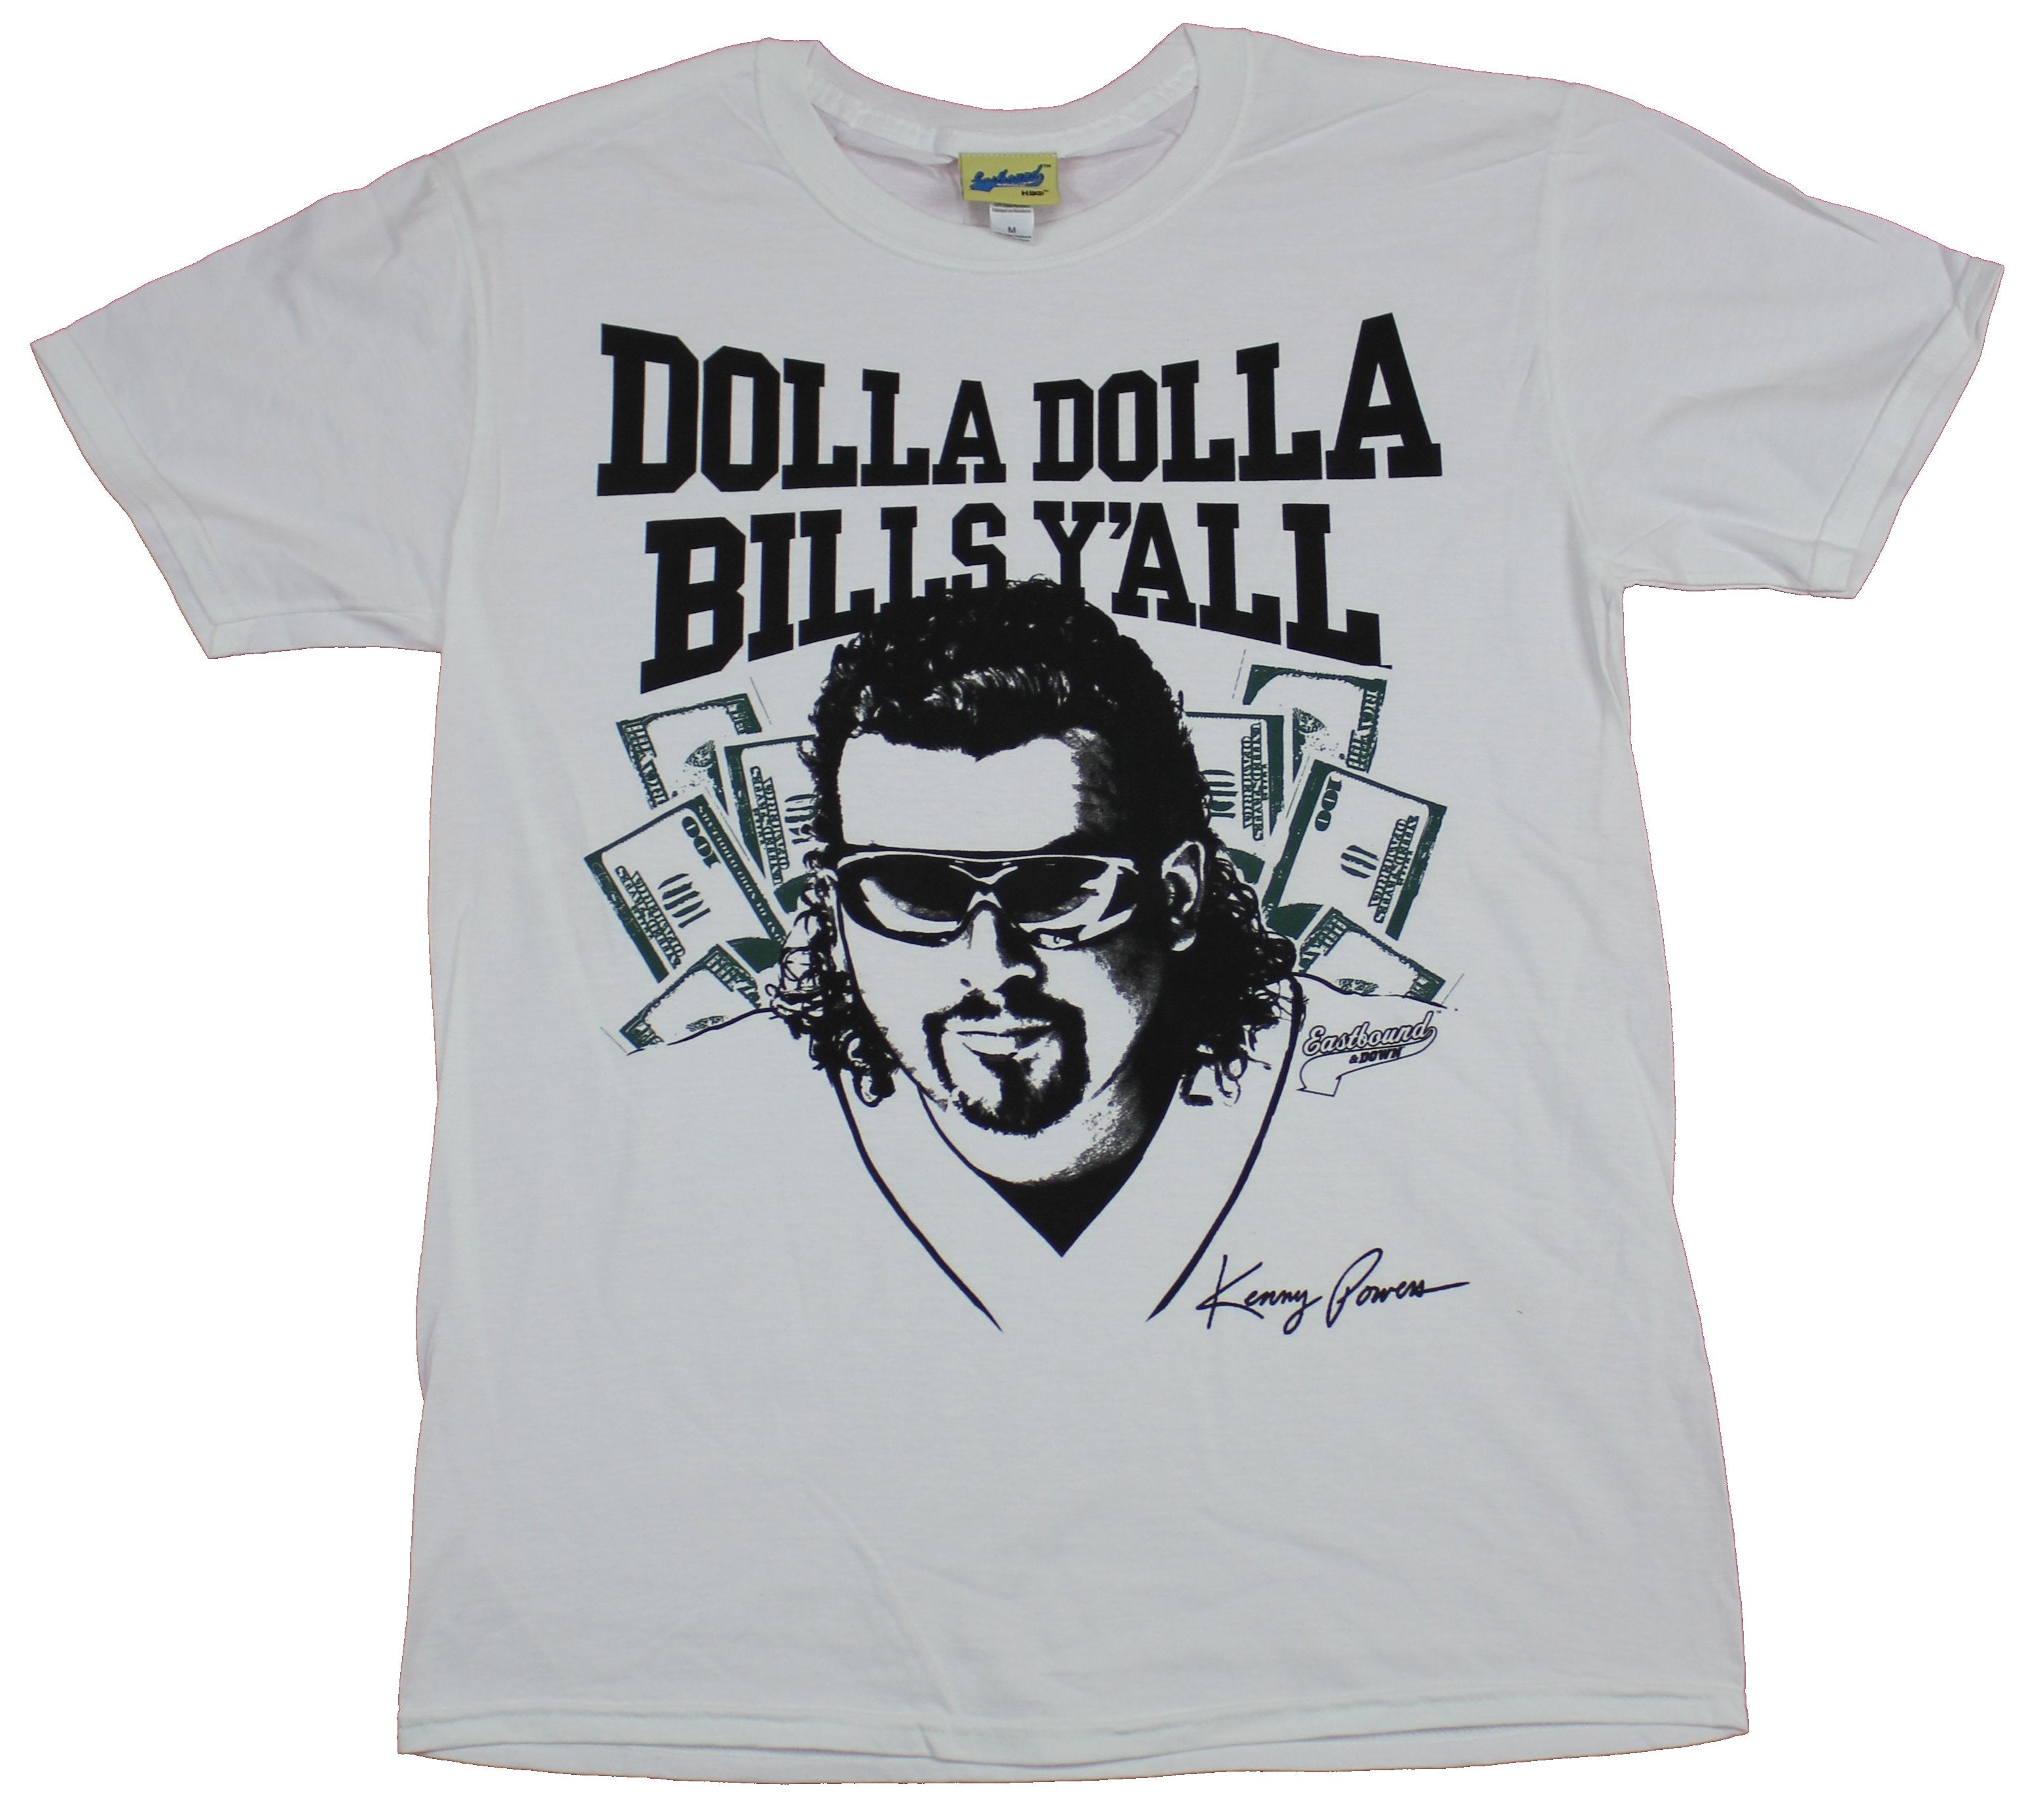 Eastbound & Down Mens T-Shirt  - Dolla Dolla Bills Yall Kenny Powers